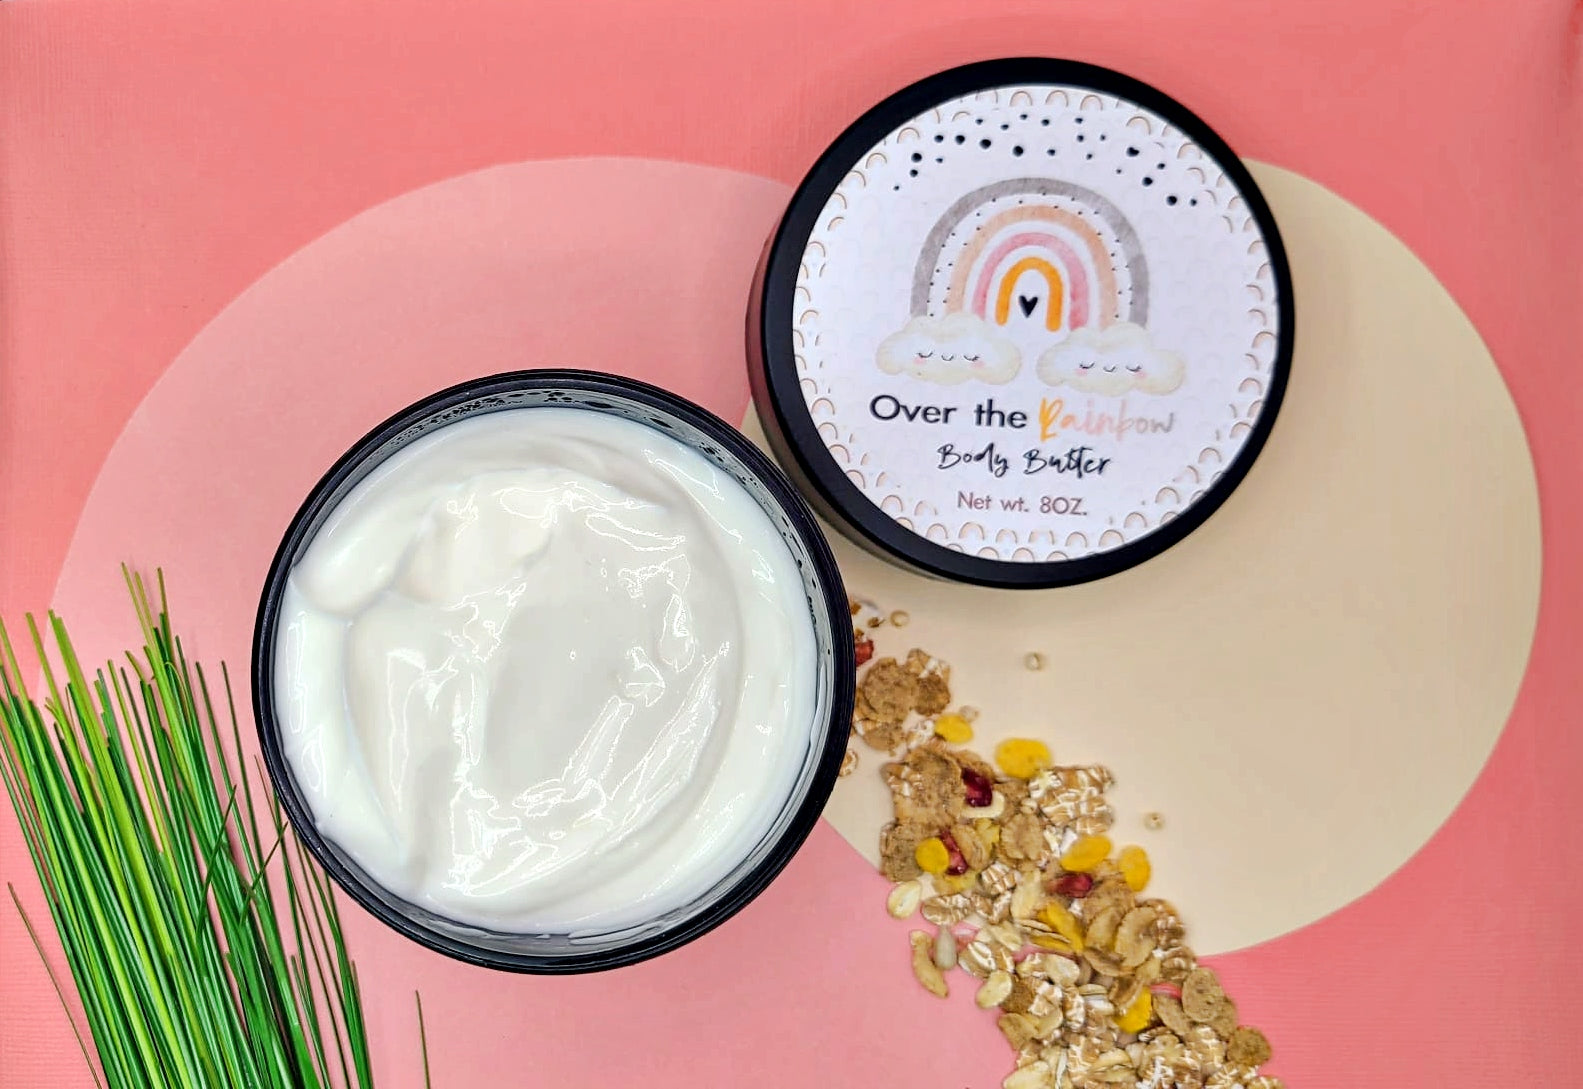 OVER THE RAINBOW BODY BUTTER 8OZ